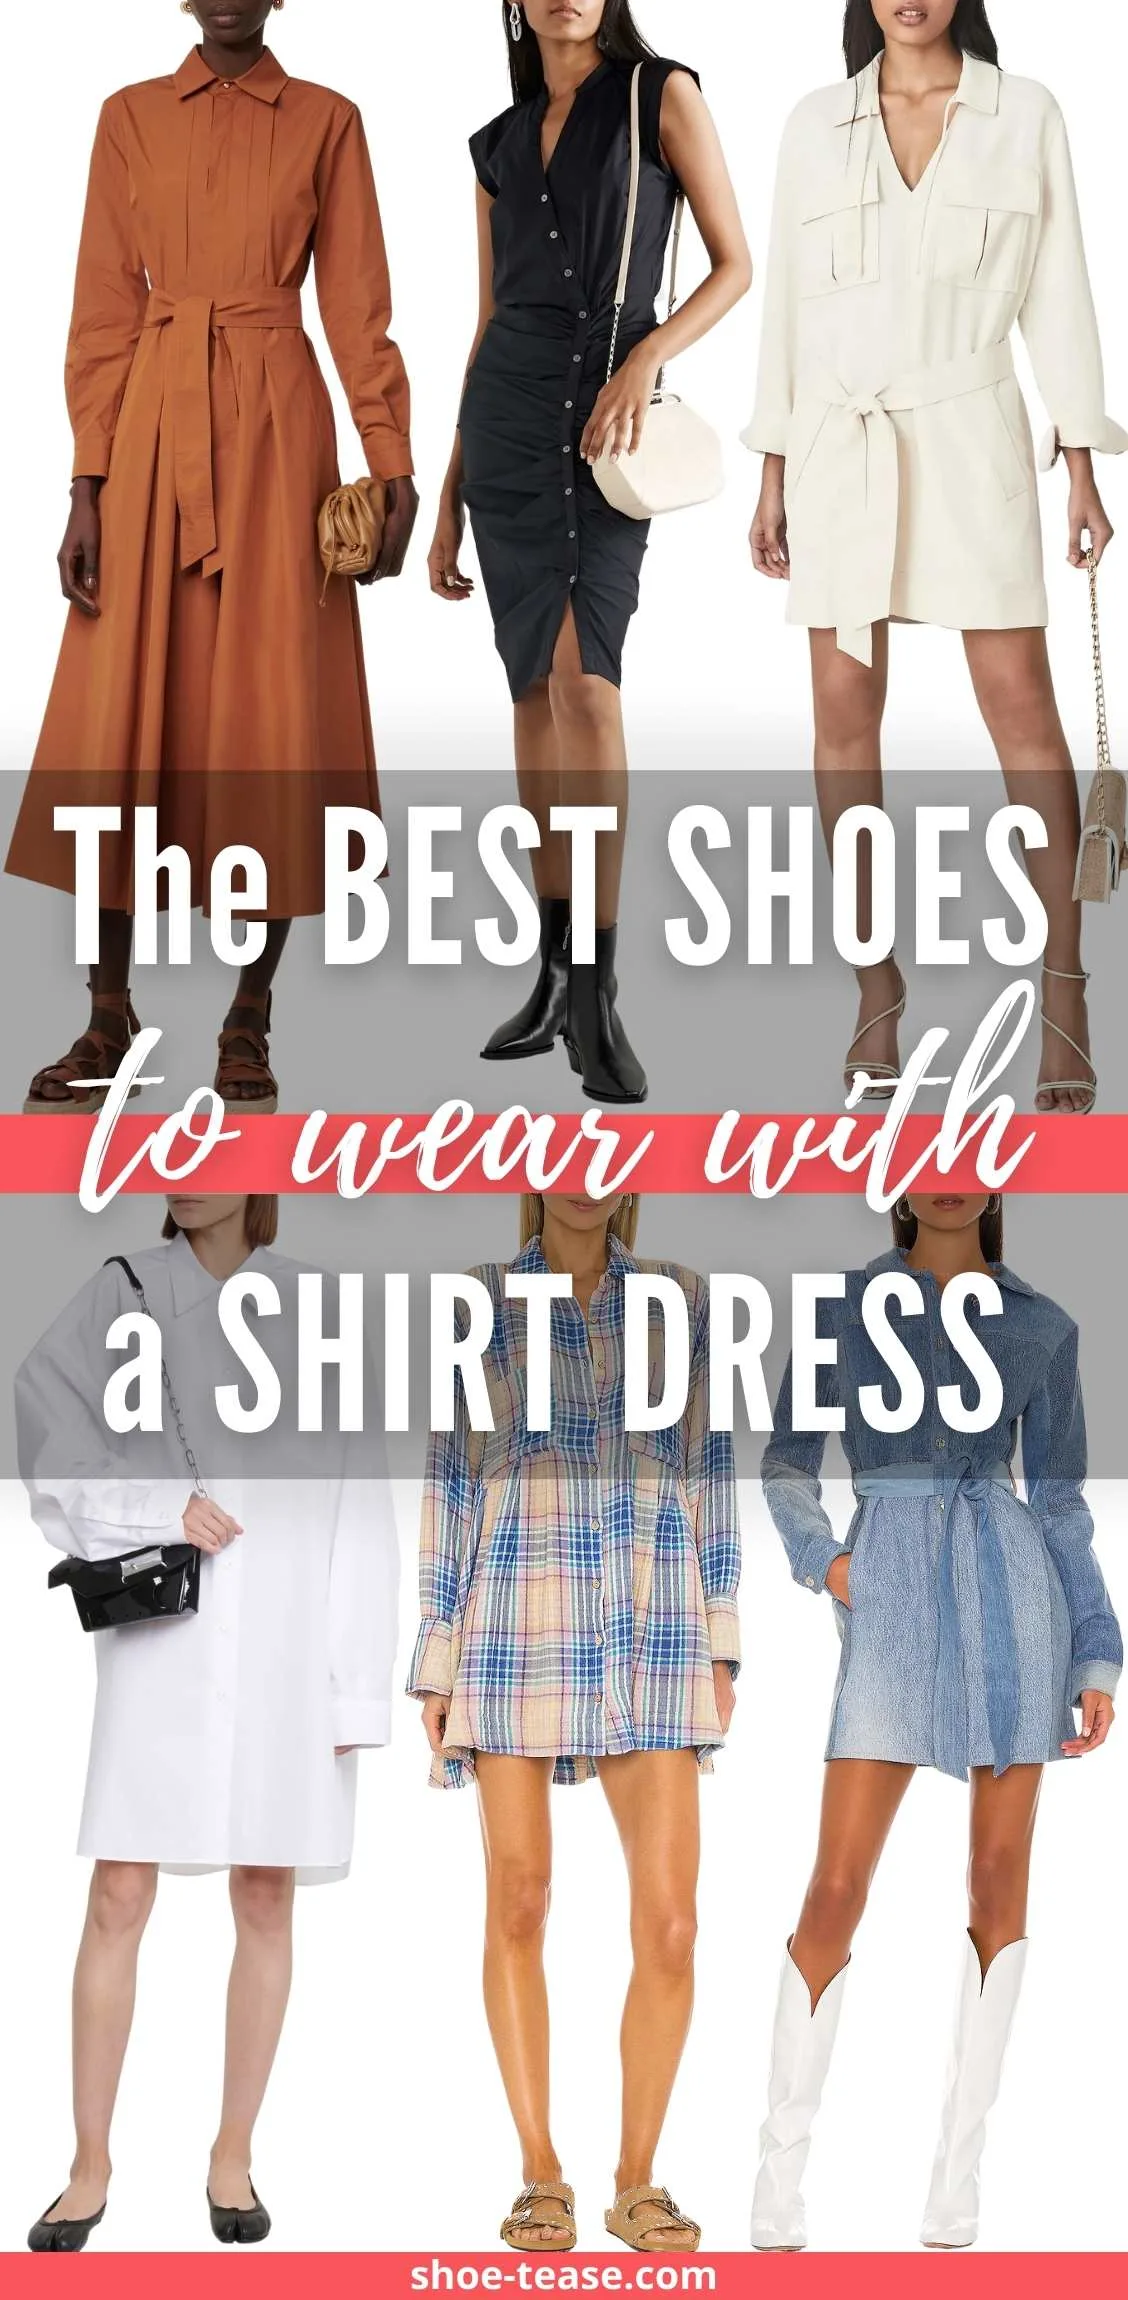 Collage of 6 women wearing different shoes with a shirt dress outfits.